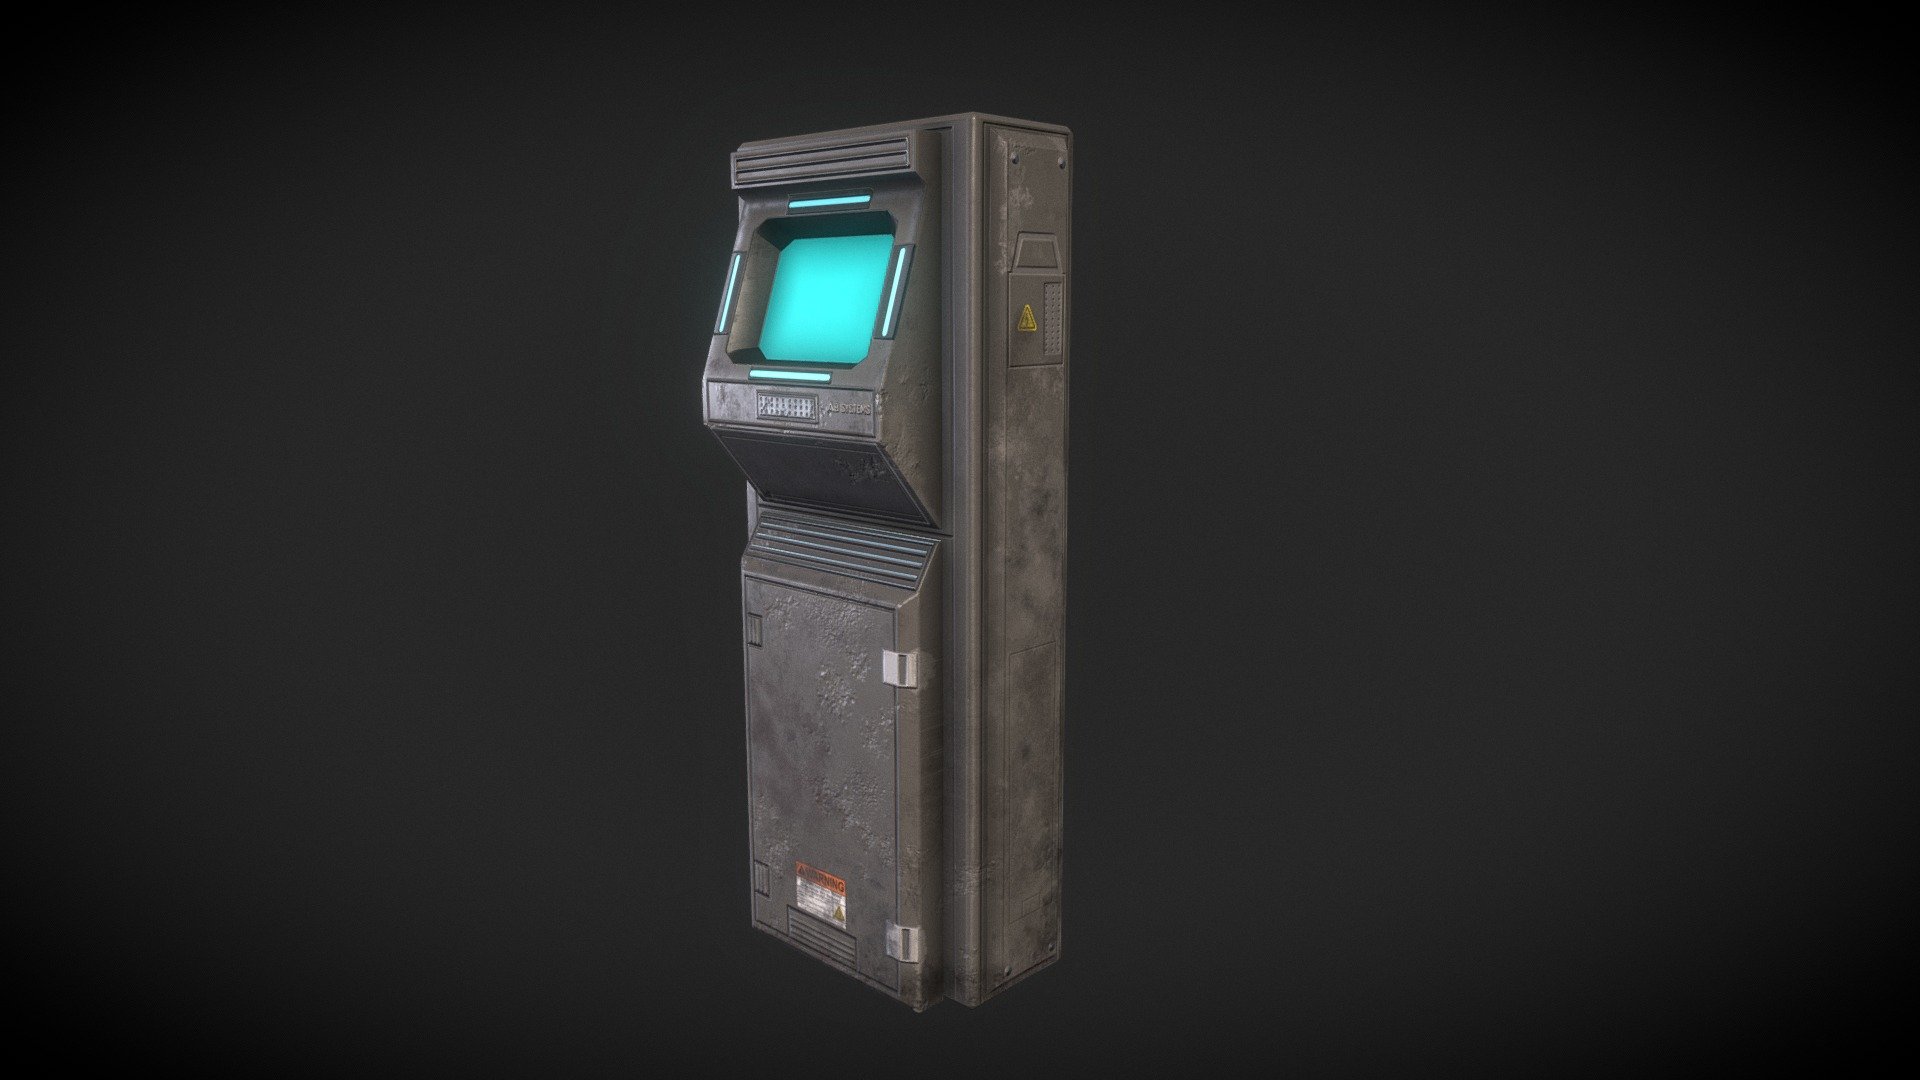 This piece was a texture/poly count optimization study, and was inspired by the computers in DOOM 2016. I just wanted to see how much detail was achievable with textures alone. I ended up with an extremely low poly model that I am really happy with! I created the model in Maya and textured and rendered it in substance painter 3d model